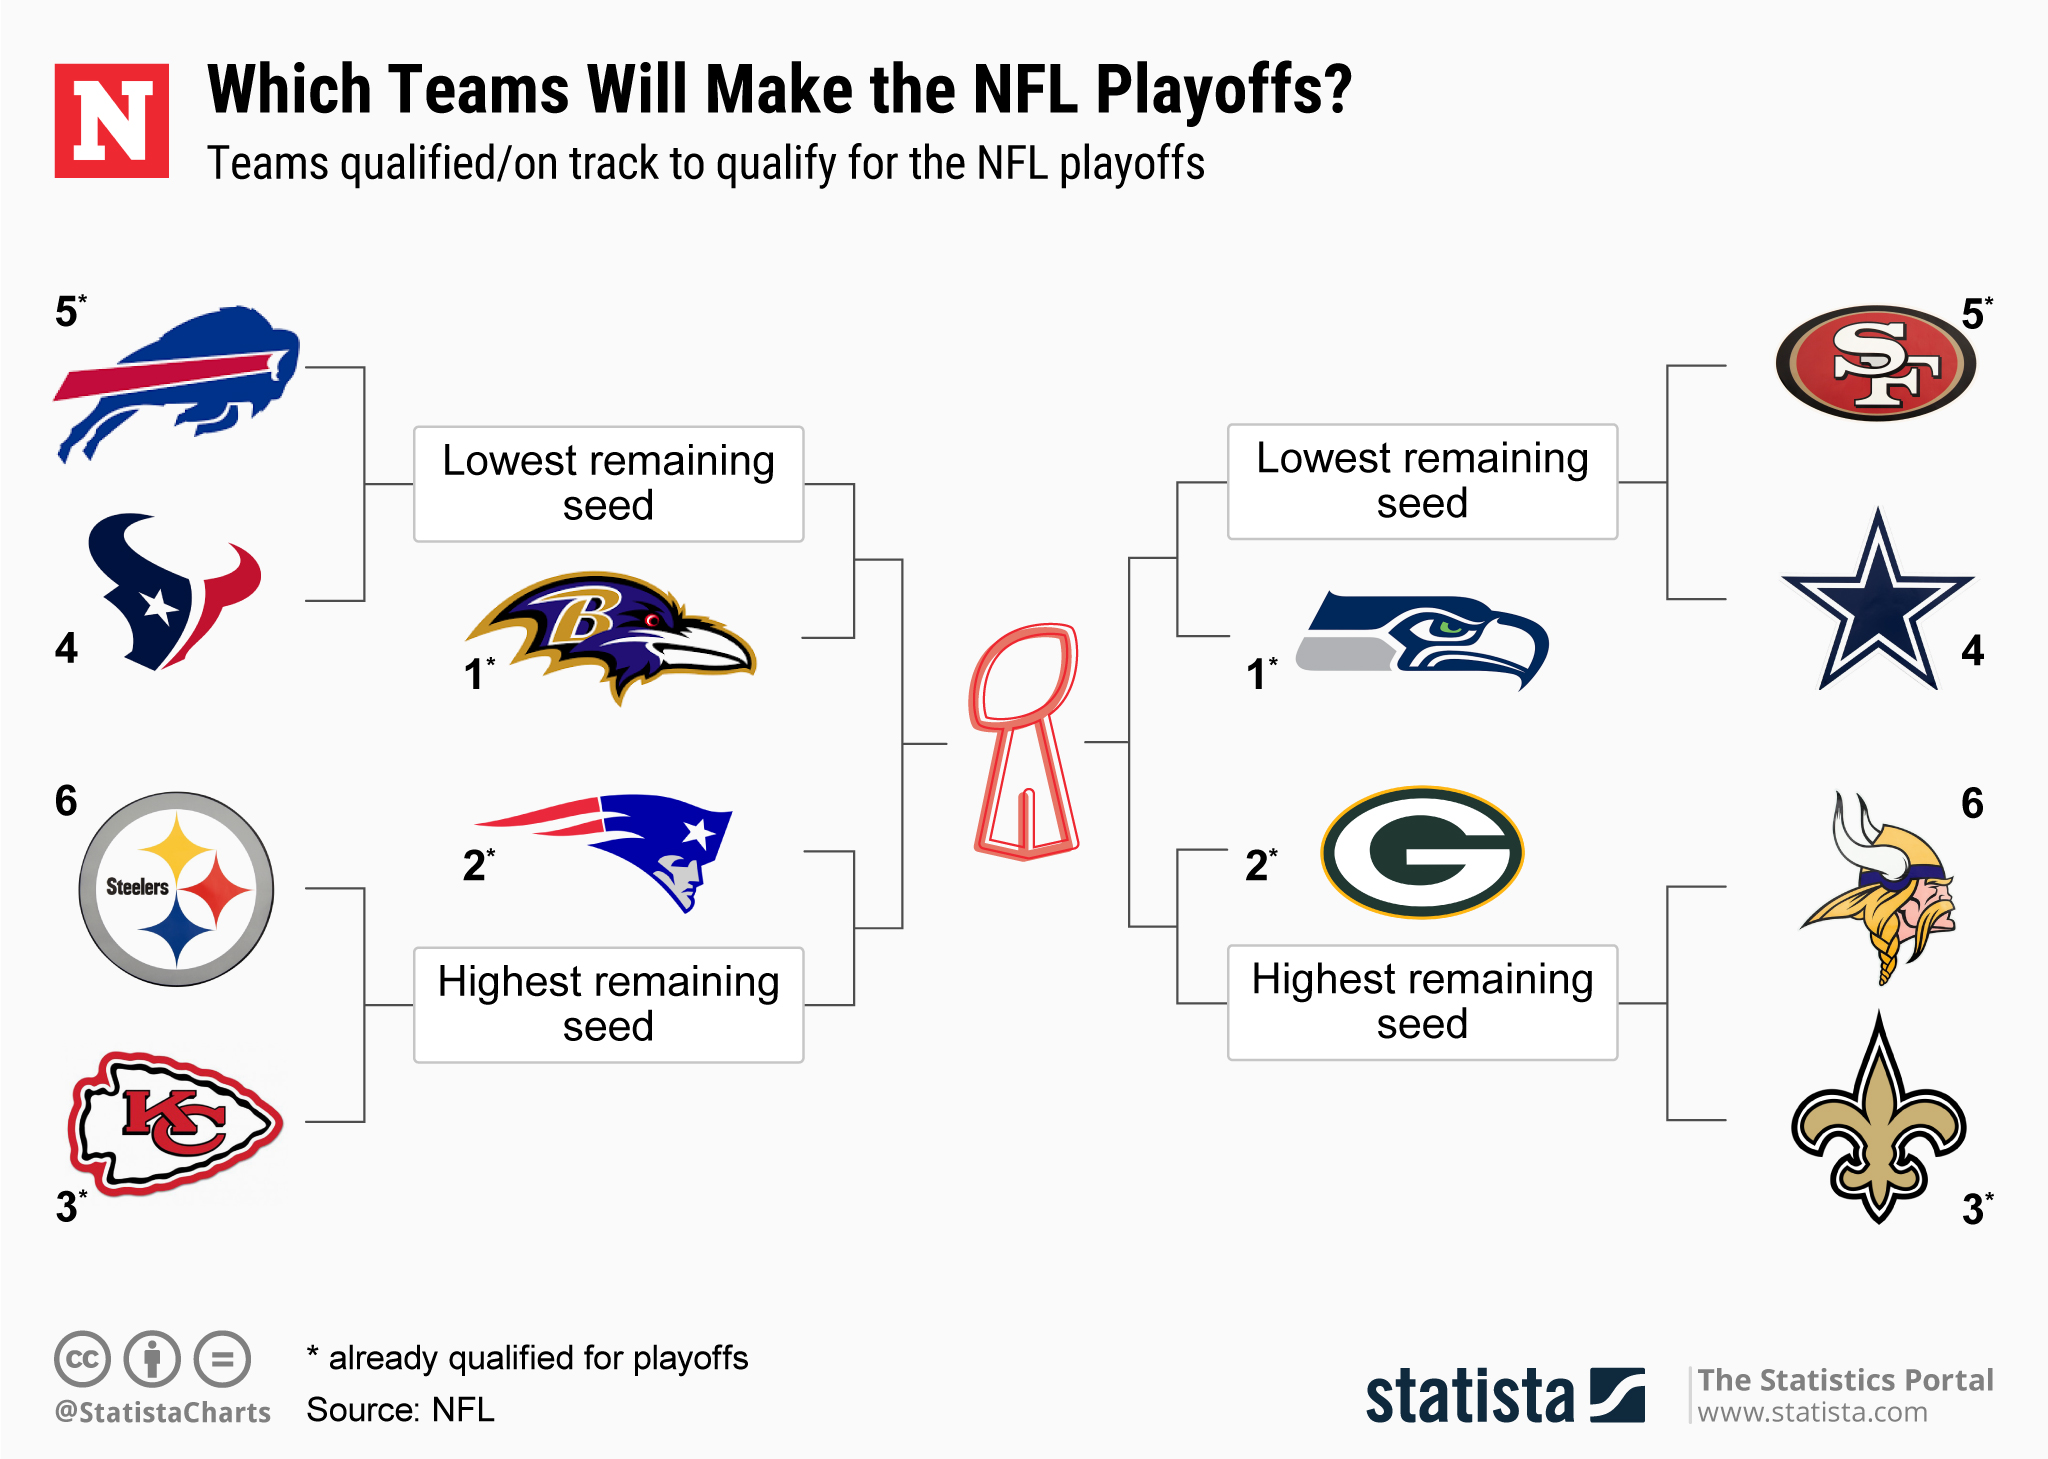 nfl playoff picture